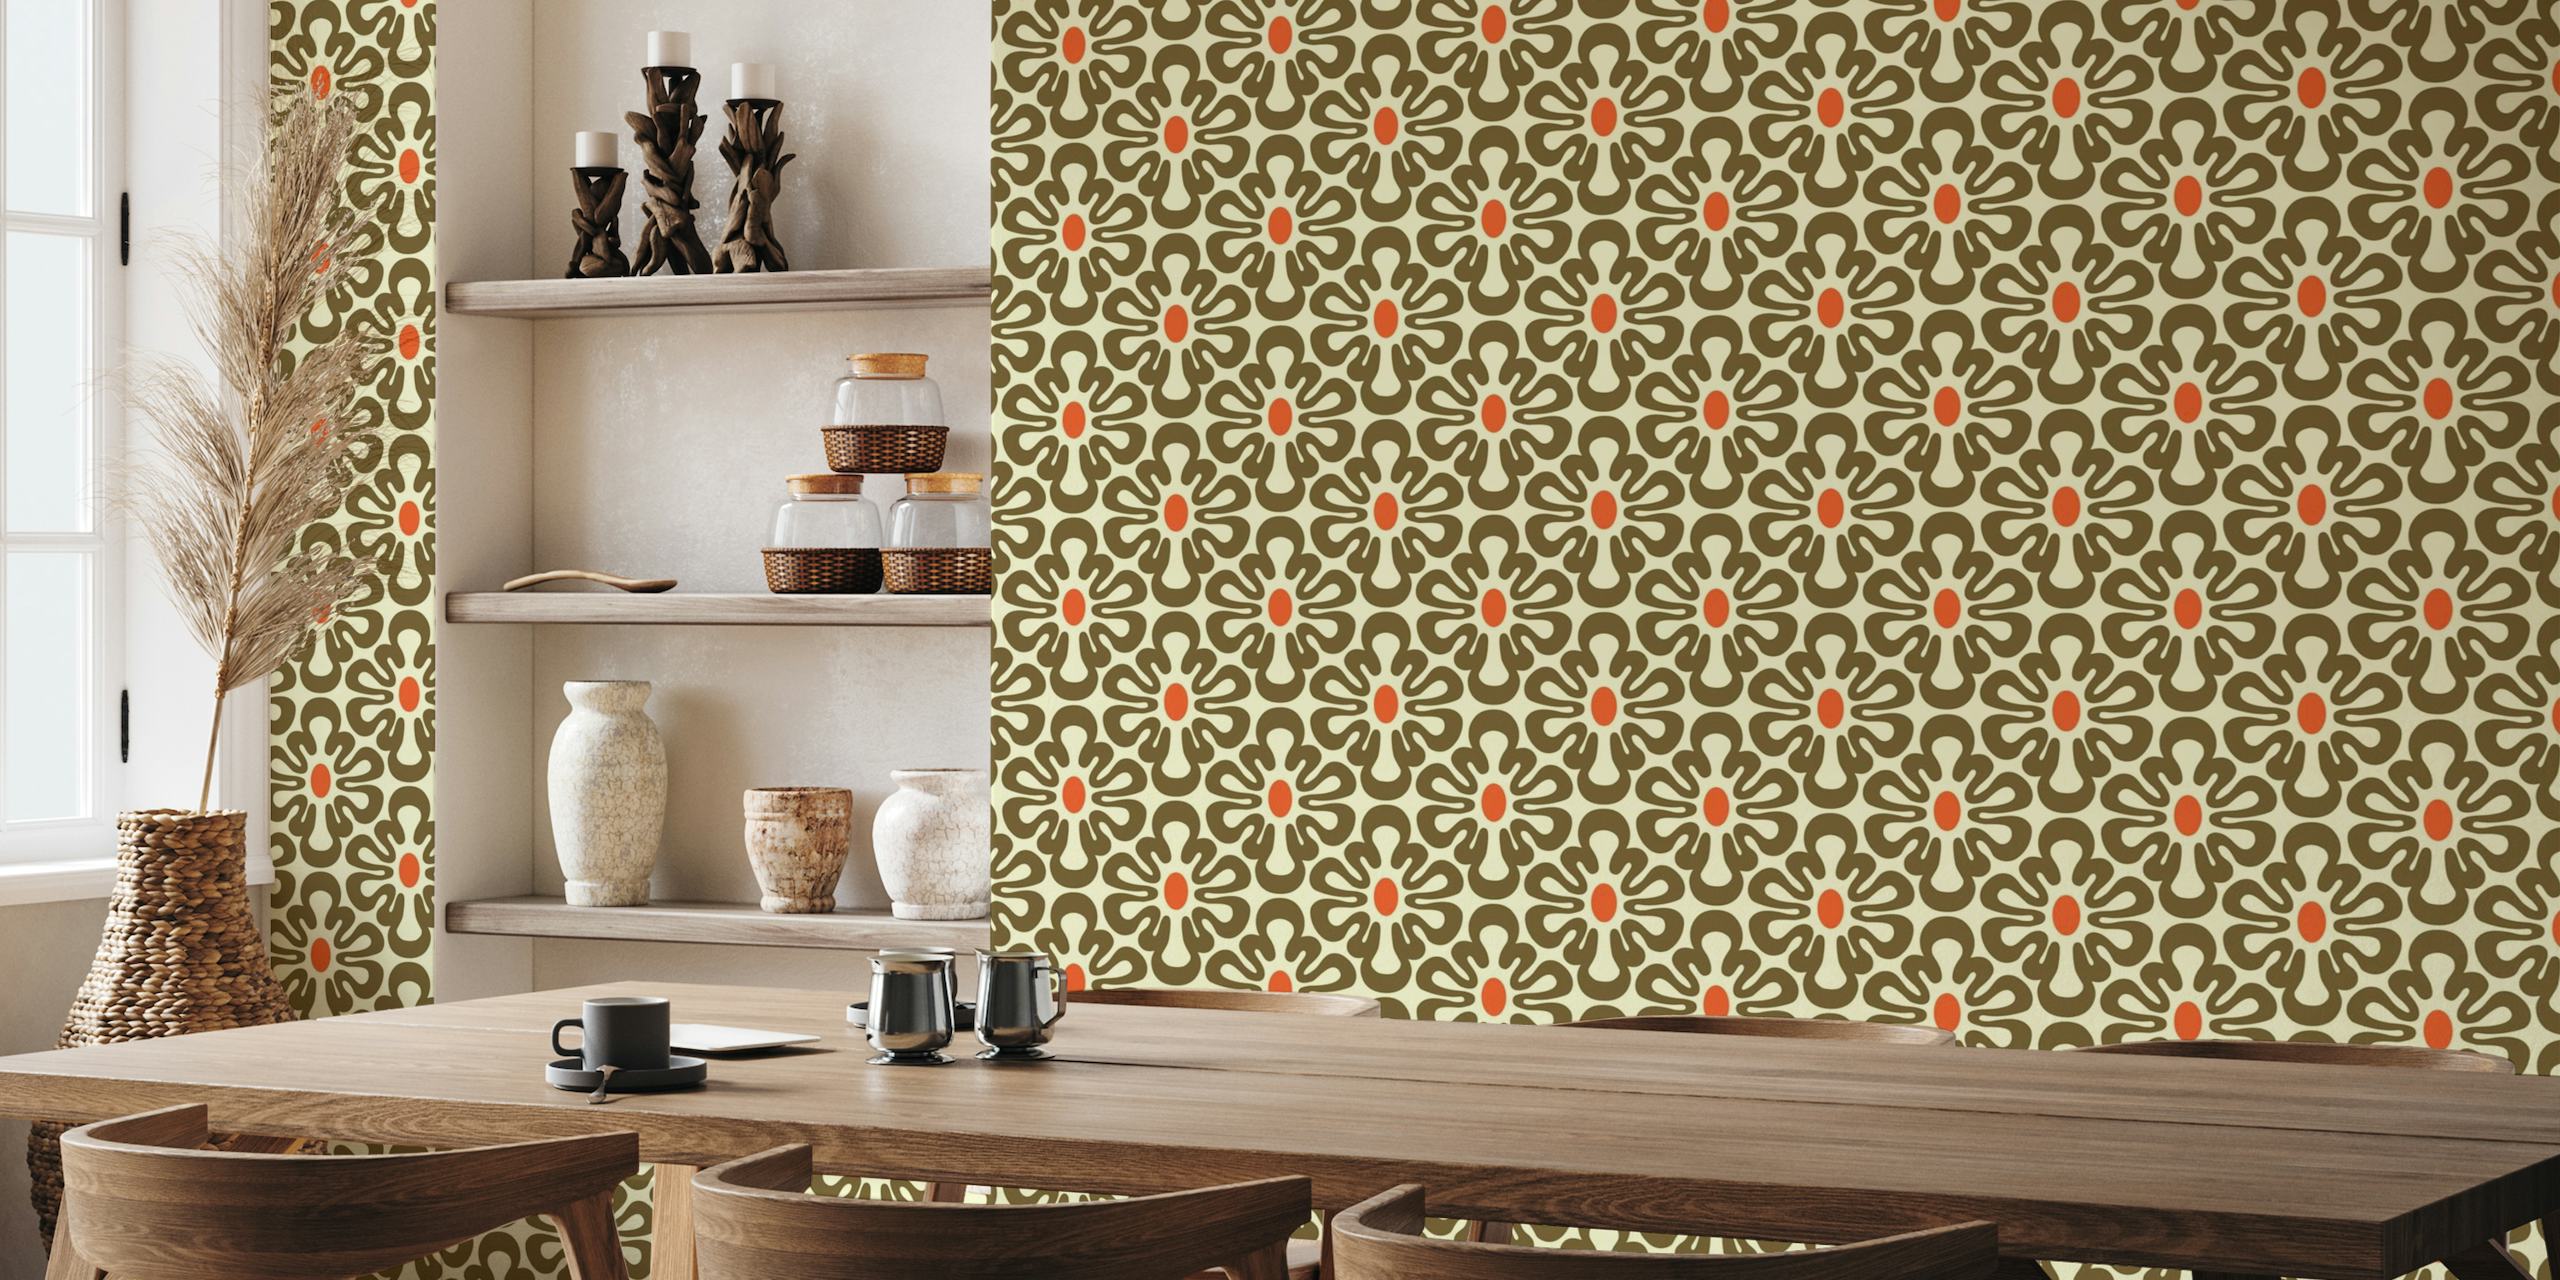 2625 A - abstract retro shapes pattern tapete